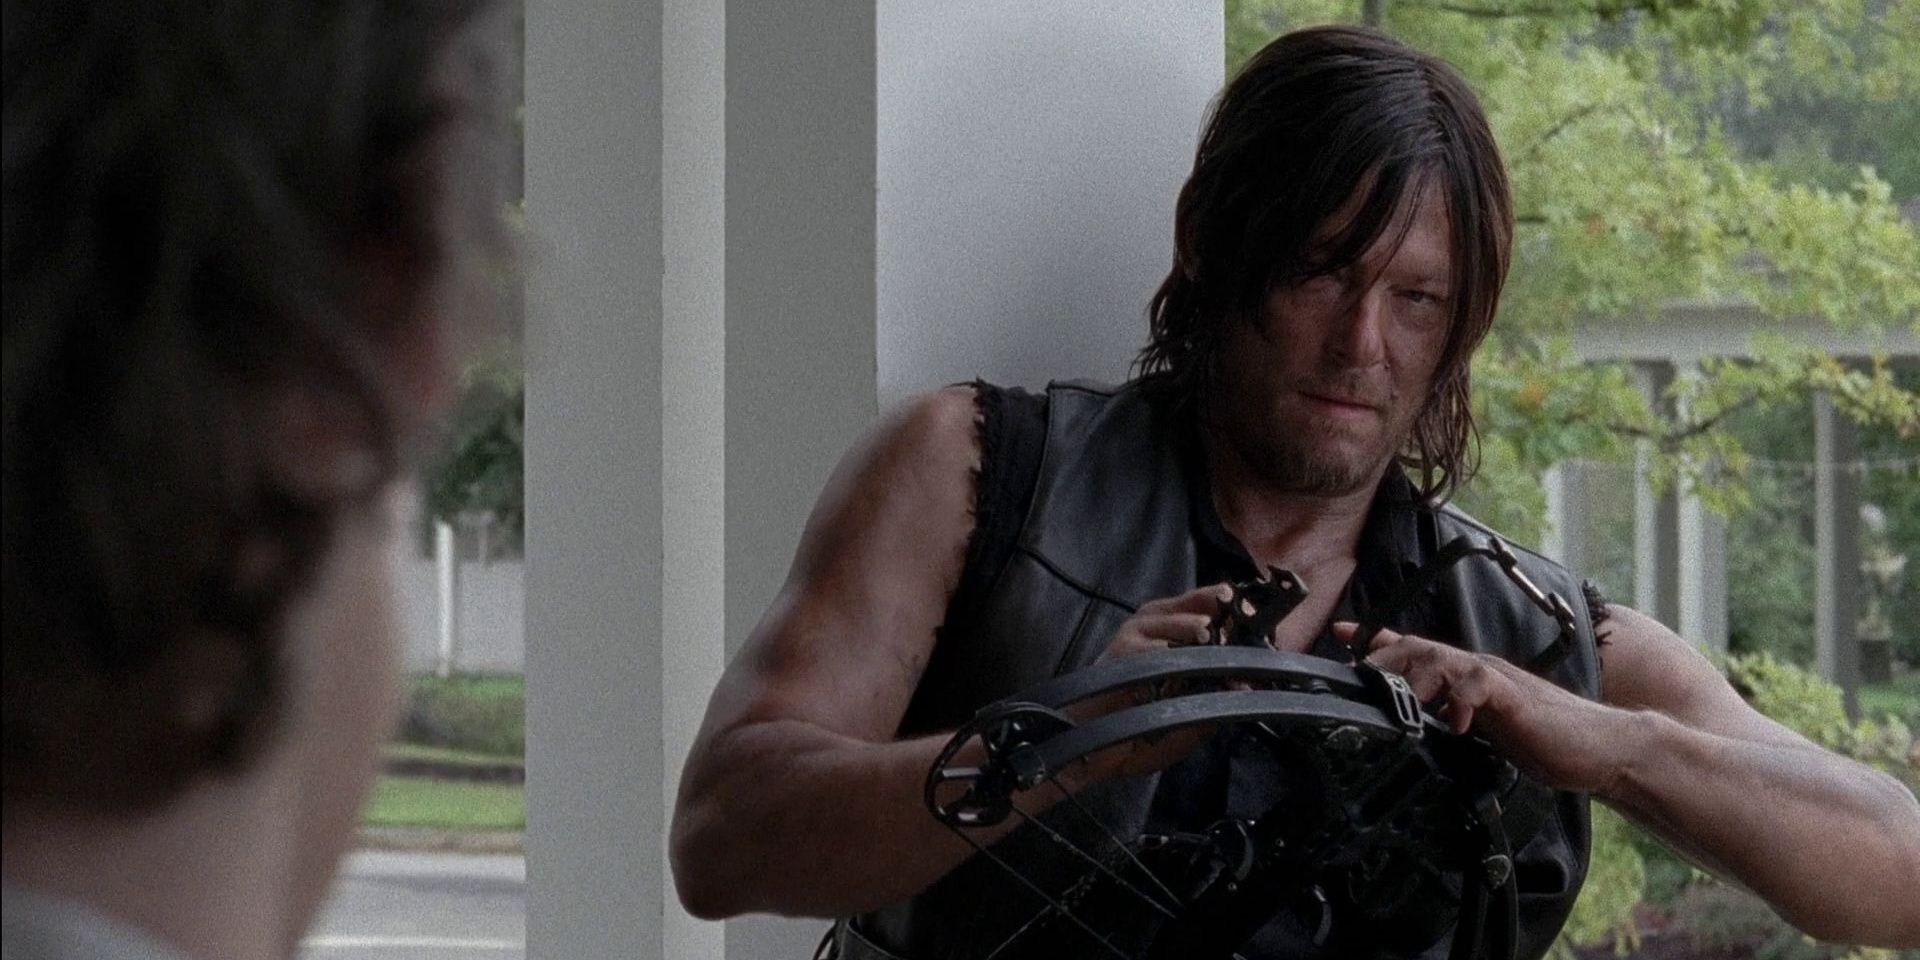 Daryl sitting on the porch with Carol in Season 5 Episode 12 of The Walking Dead